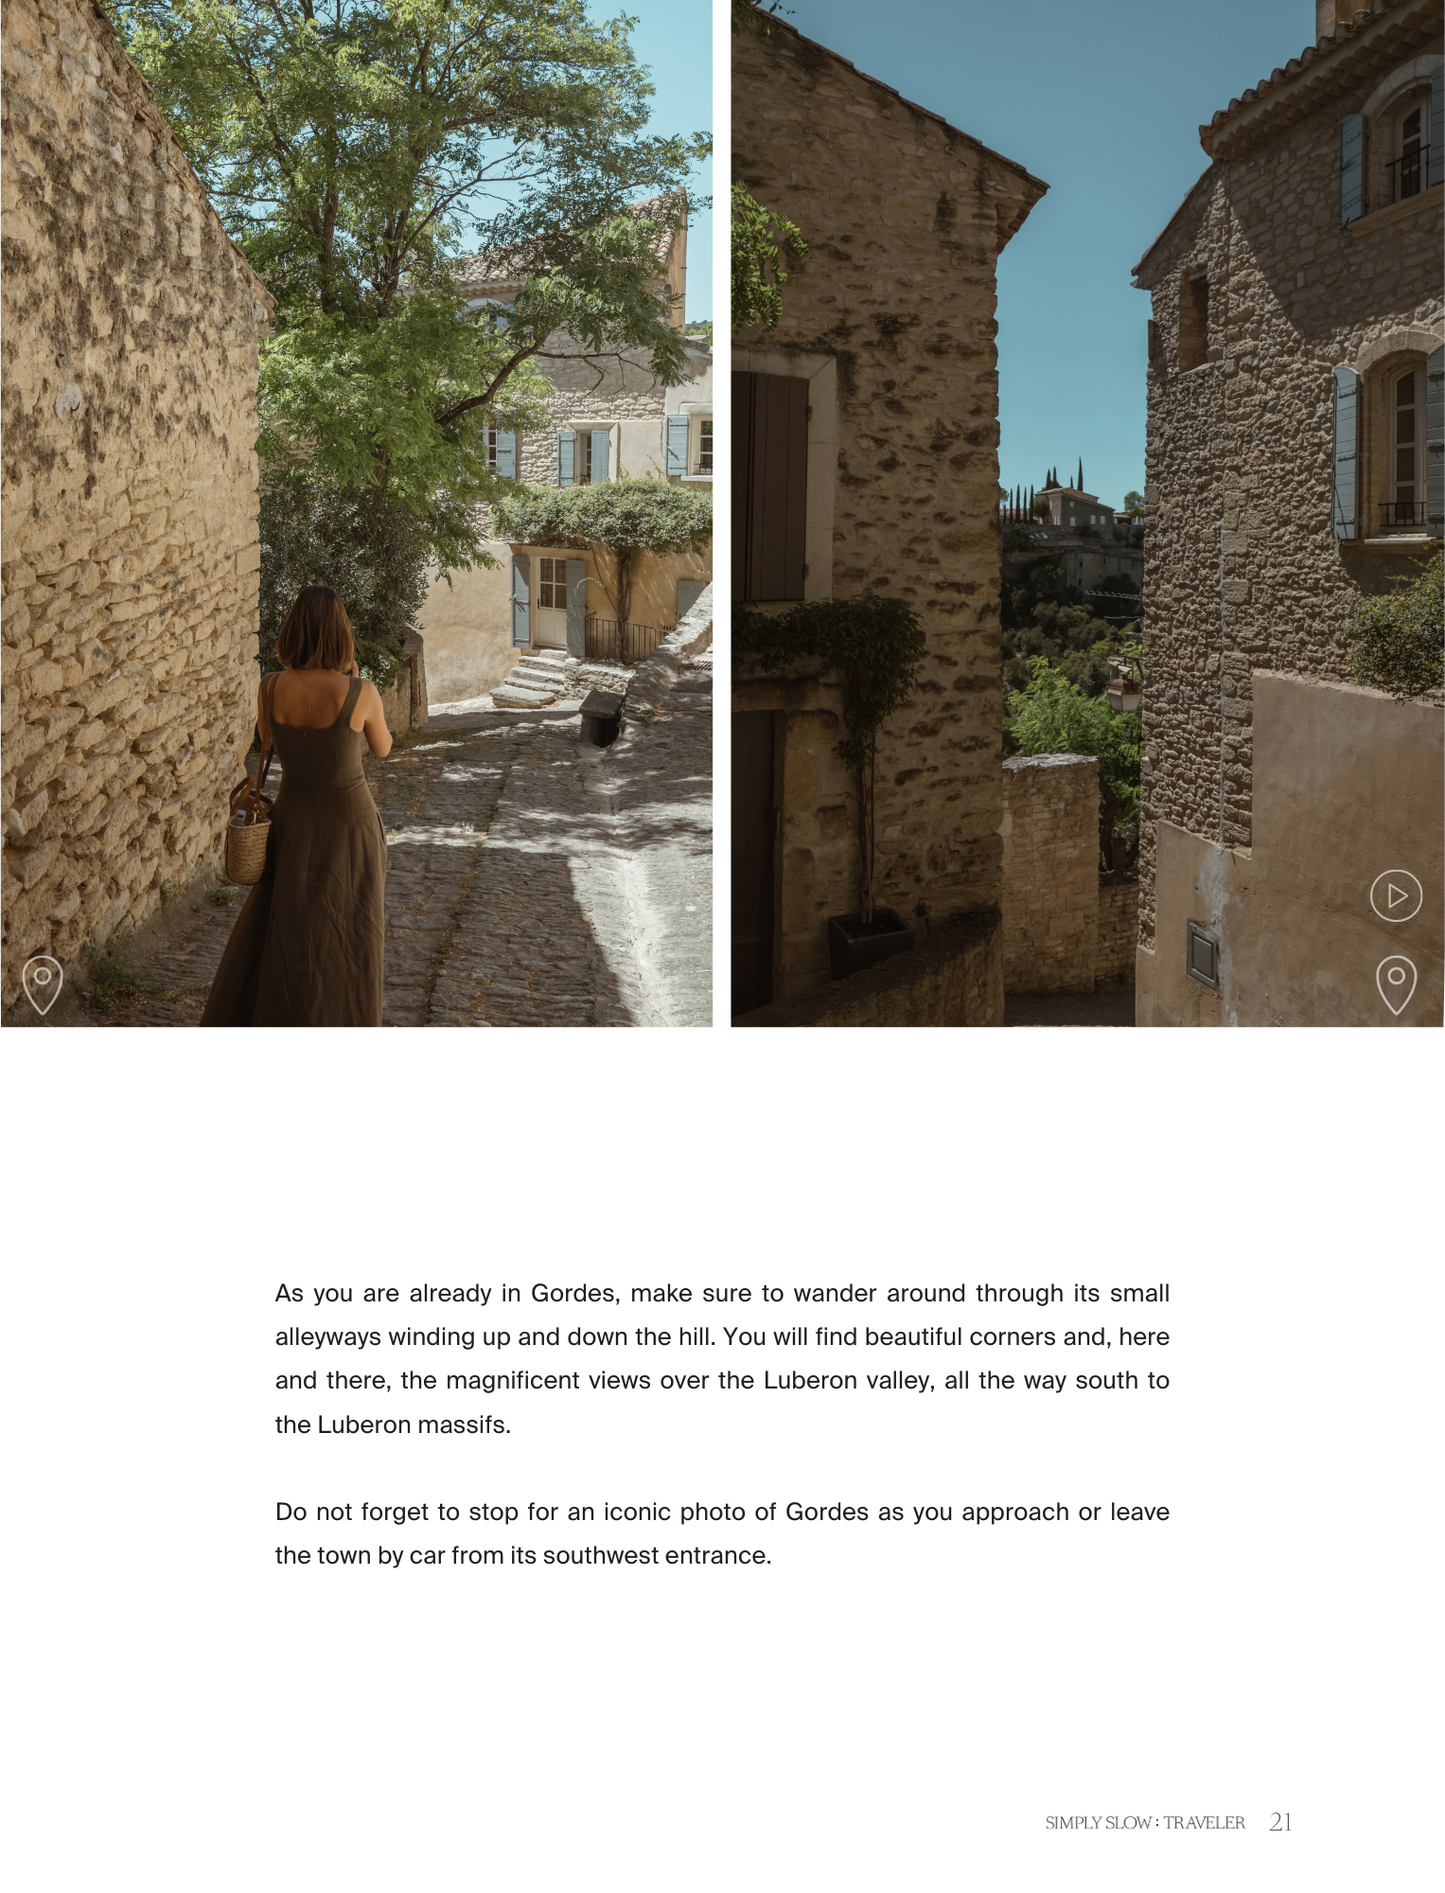 A Guide to Provence - a page on Gordes, by Simply Slow Traveler